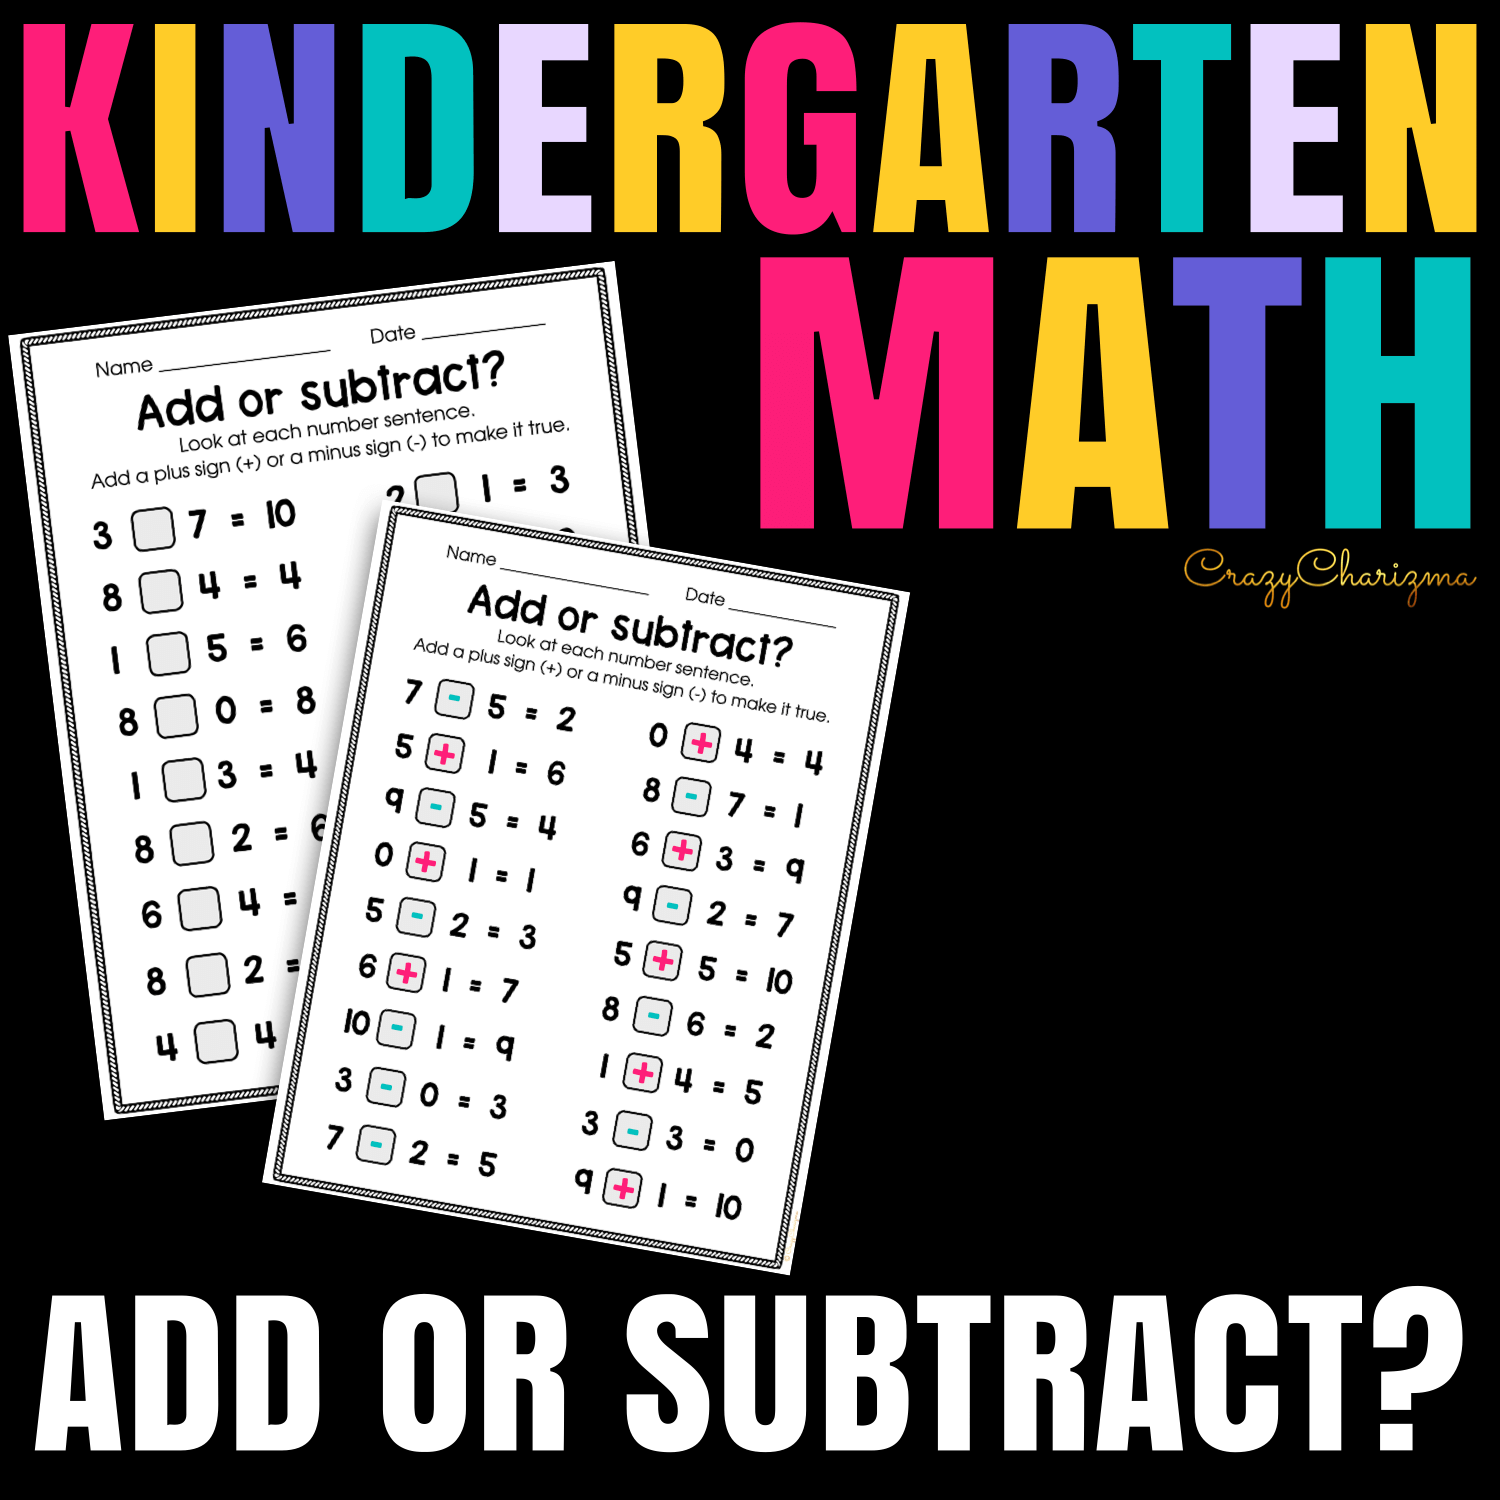 Practice addition and subtraction to 10 with these worksheets. Kids will decide what sign (plus or minus) to choose so that the number sentence is correct.